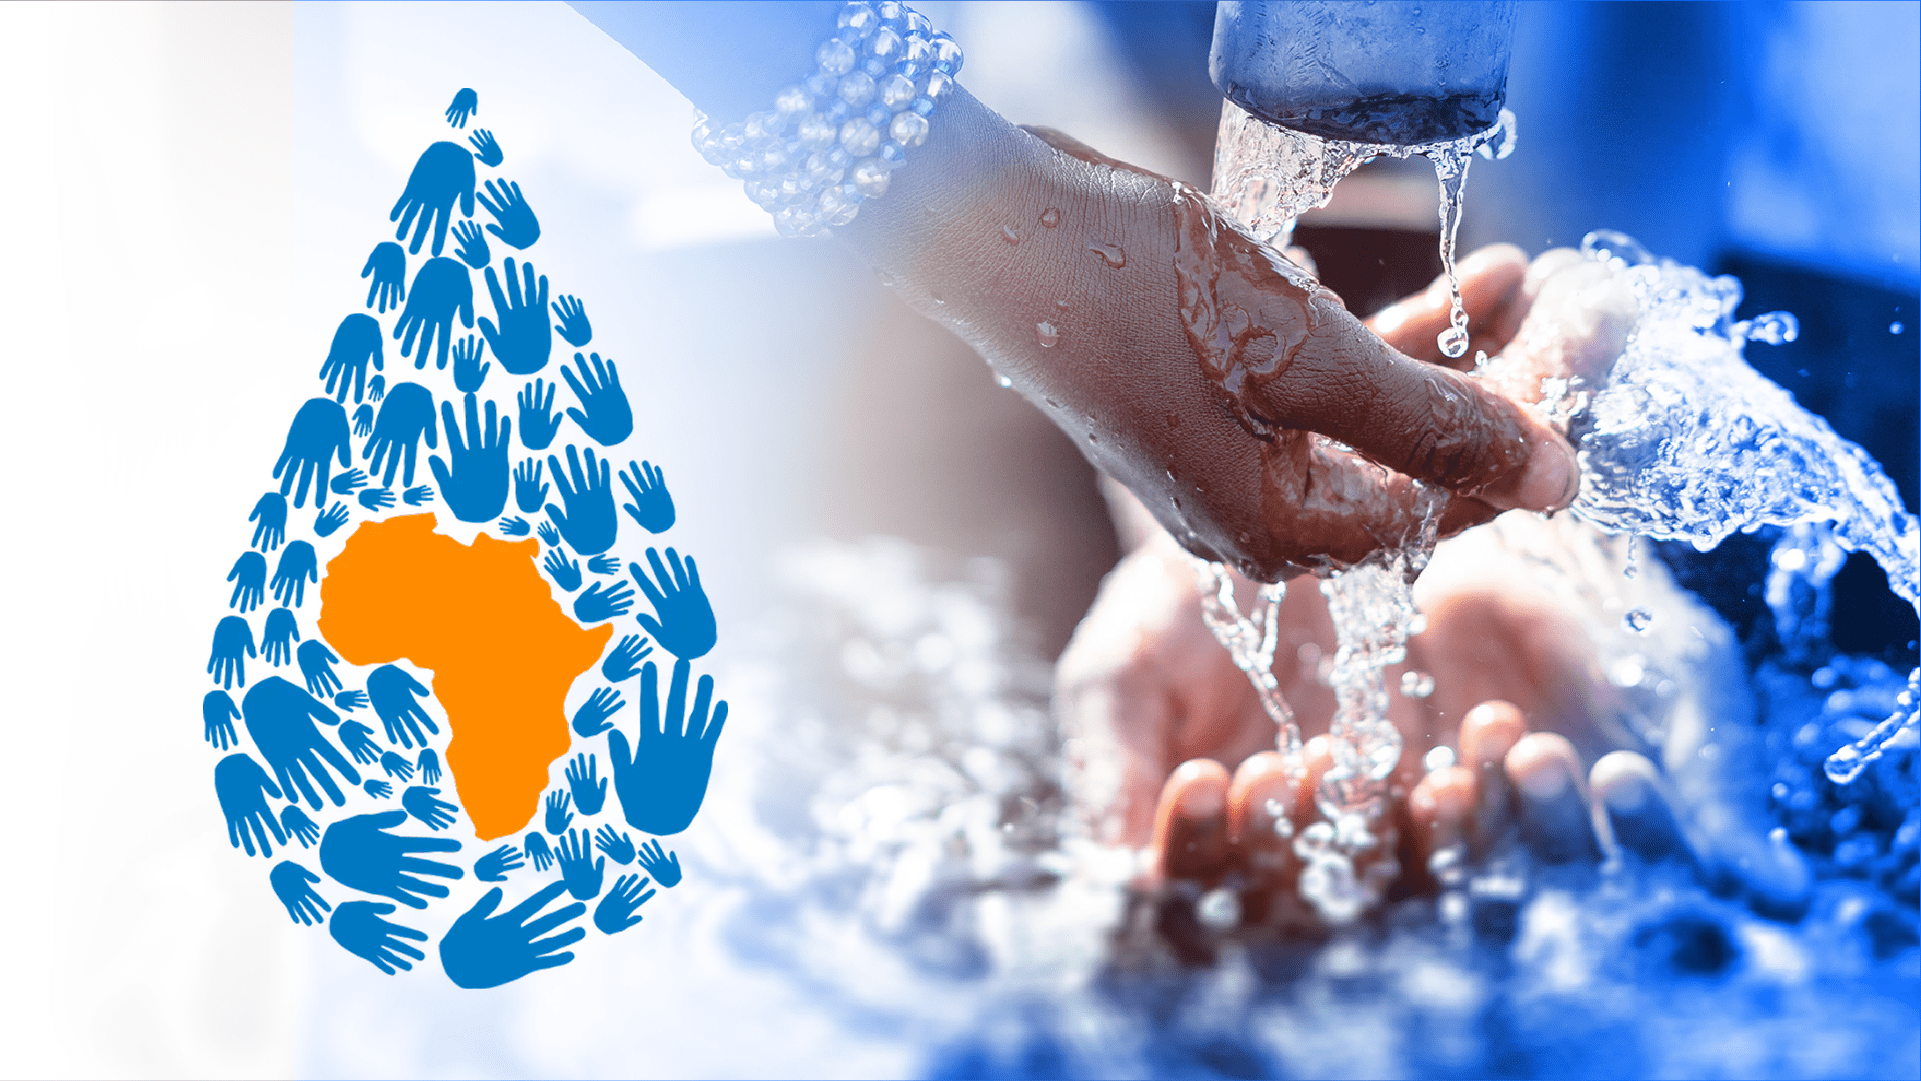 UPDATE-TheWaterProject | The Giving Block